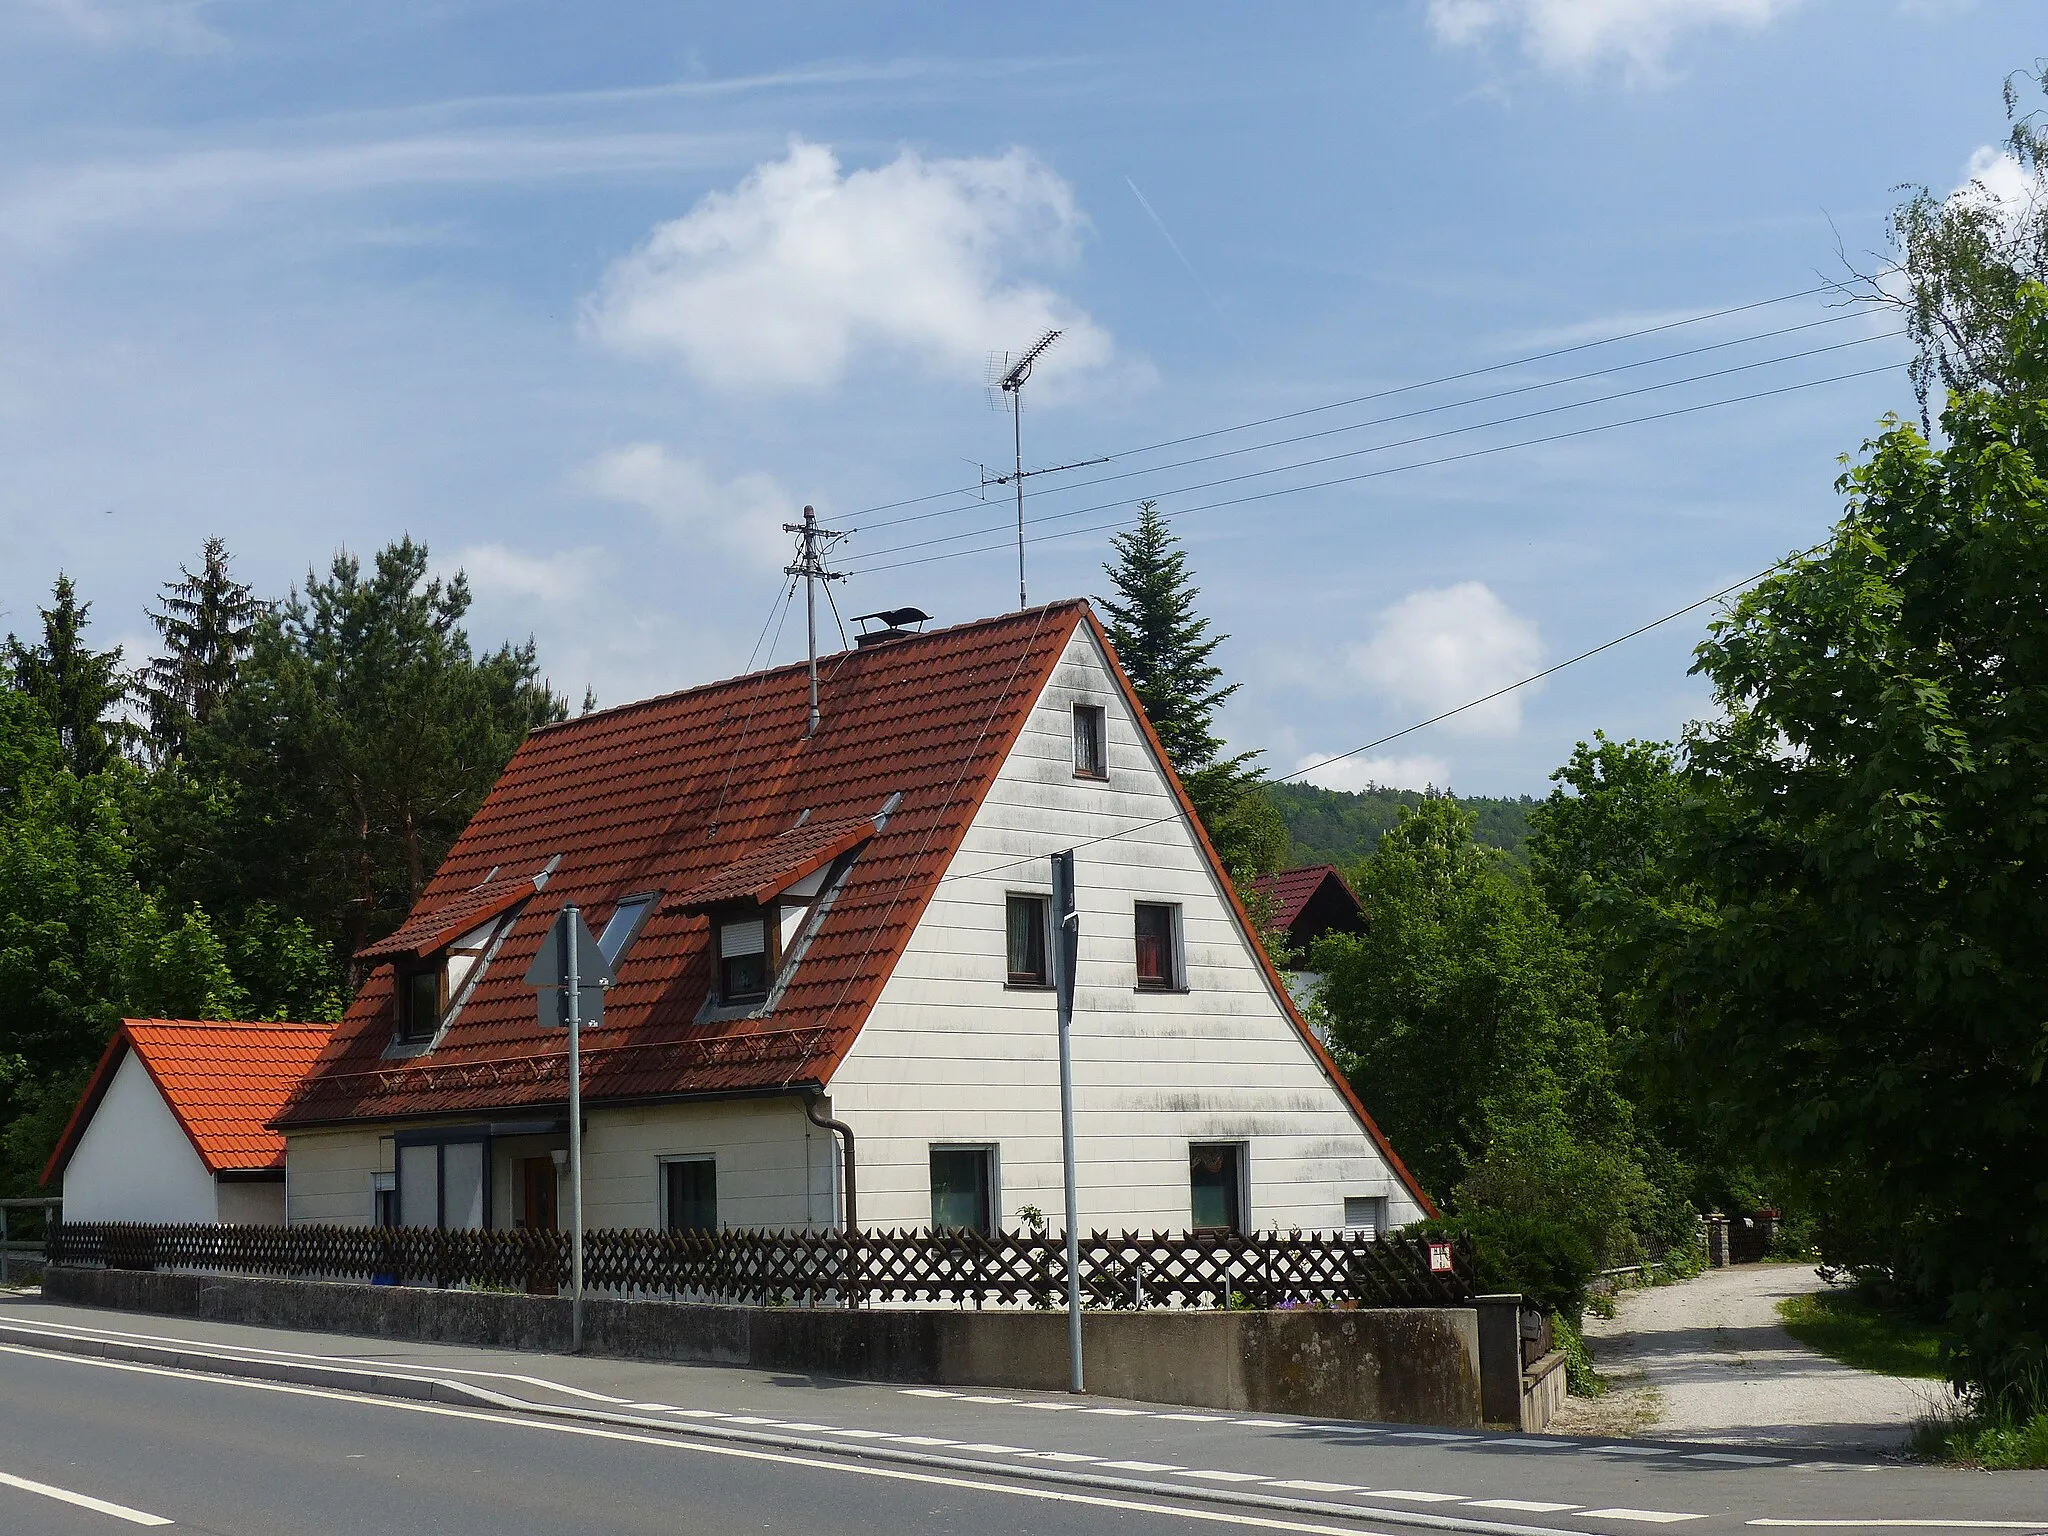 Photo showing: The hamlet Weidenbühl, a district of the municipality of Igensdorf